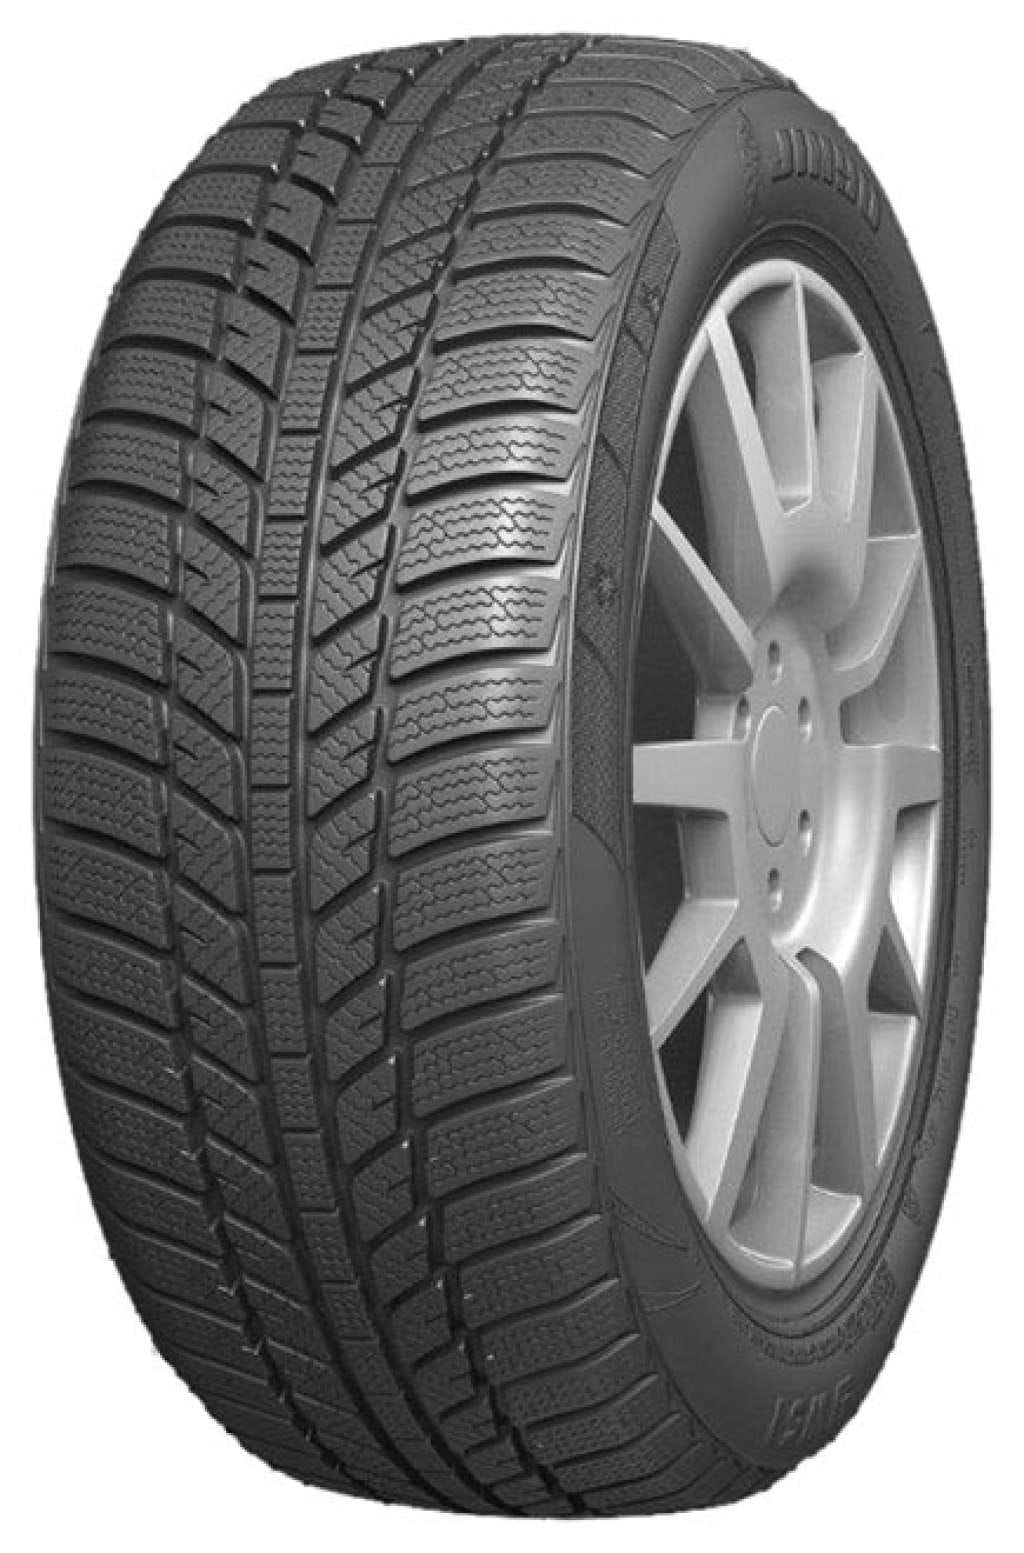 Gomme Nuove Jinyu Tyres 175/70 R13 82T YW 51 M+S pneumatici nuovi Invernale